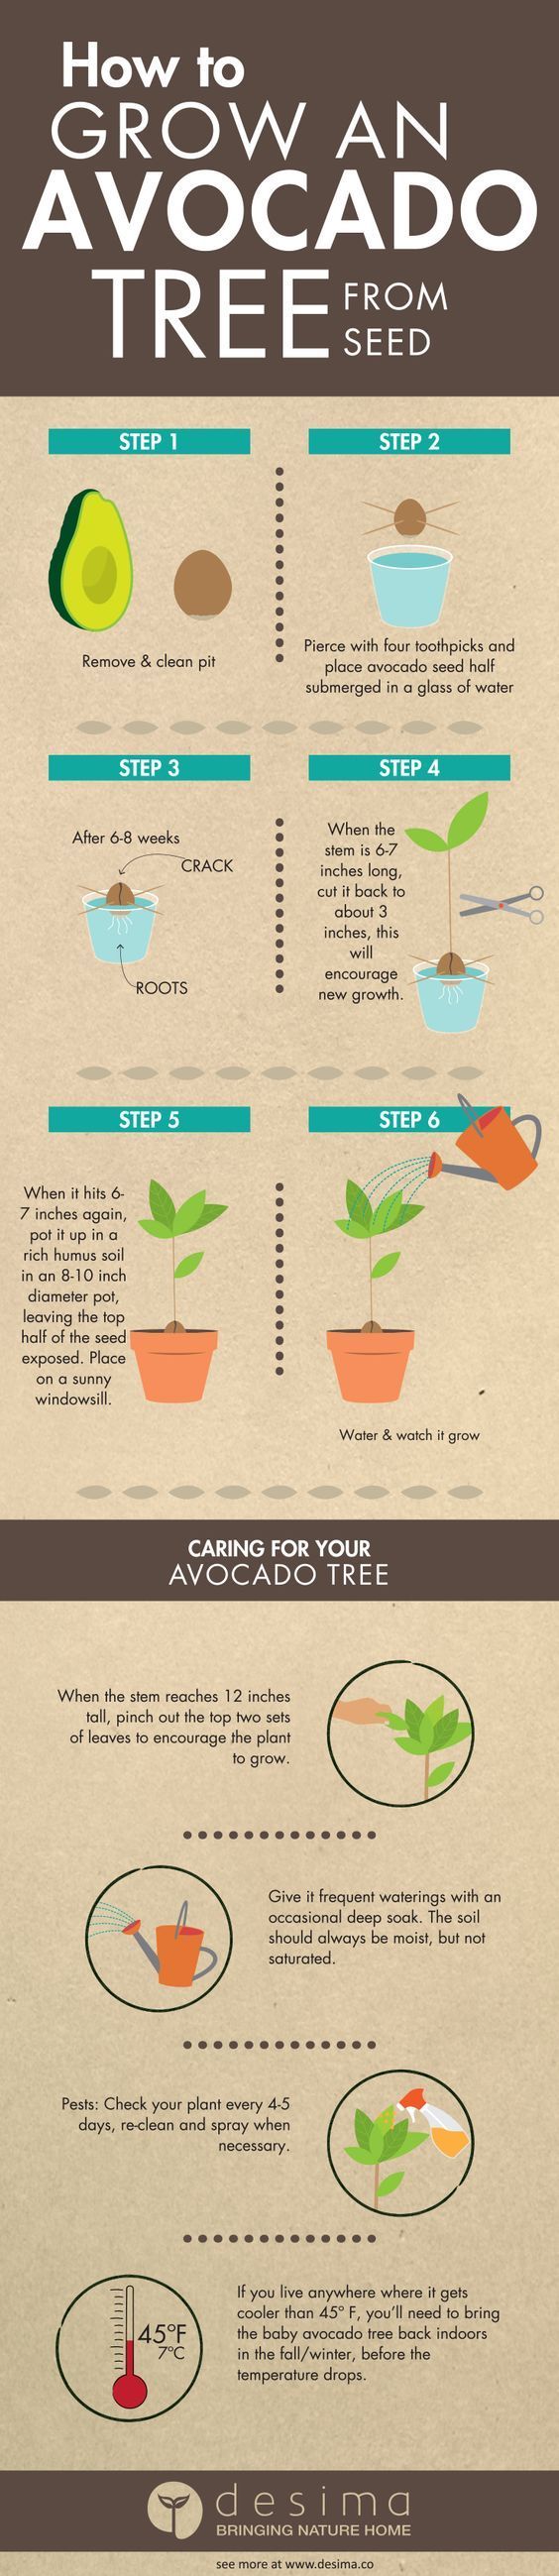 Infographic on how to grow an avocado tree from seed.: